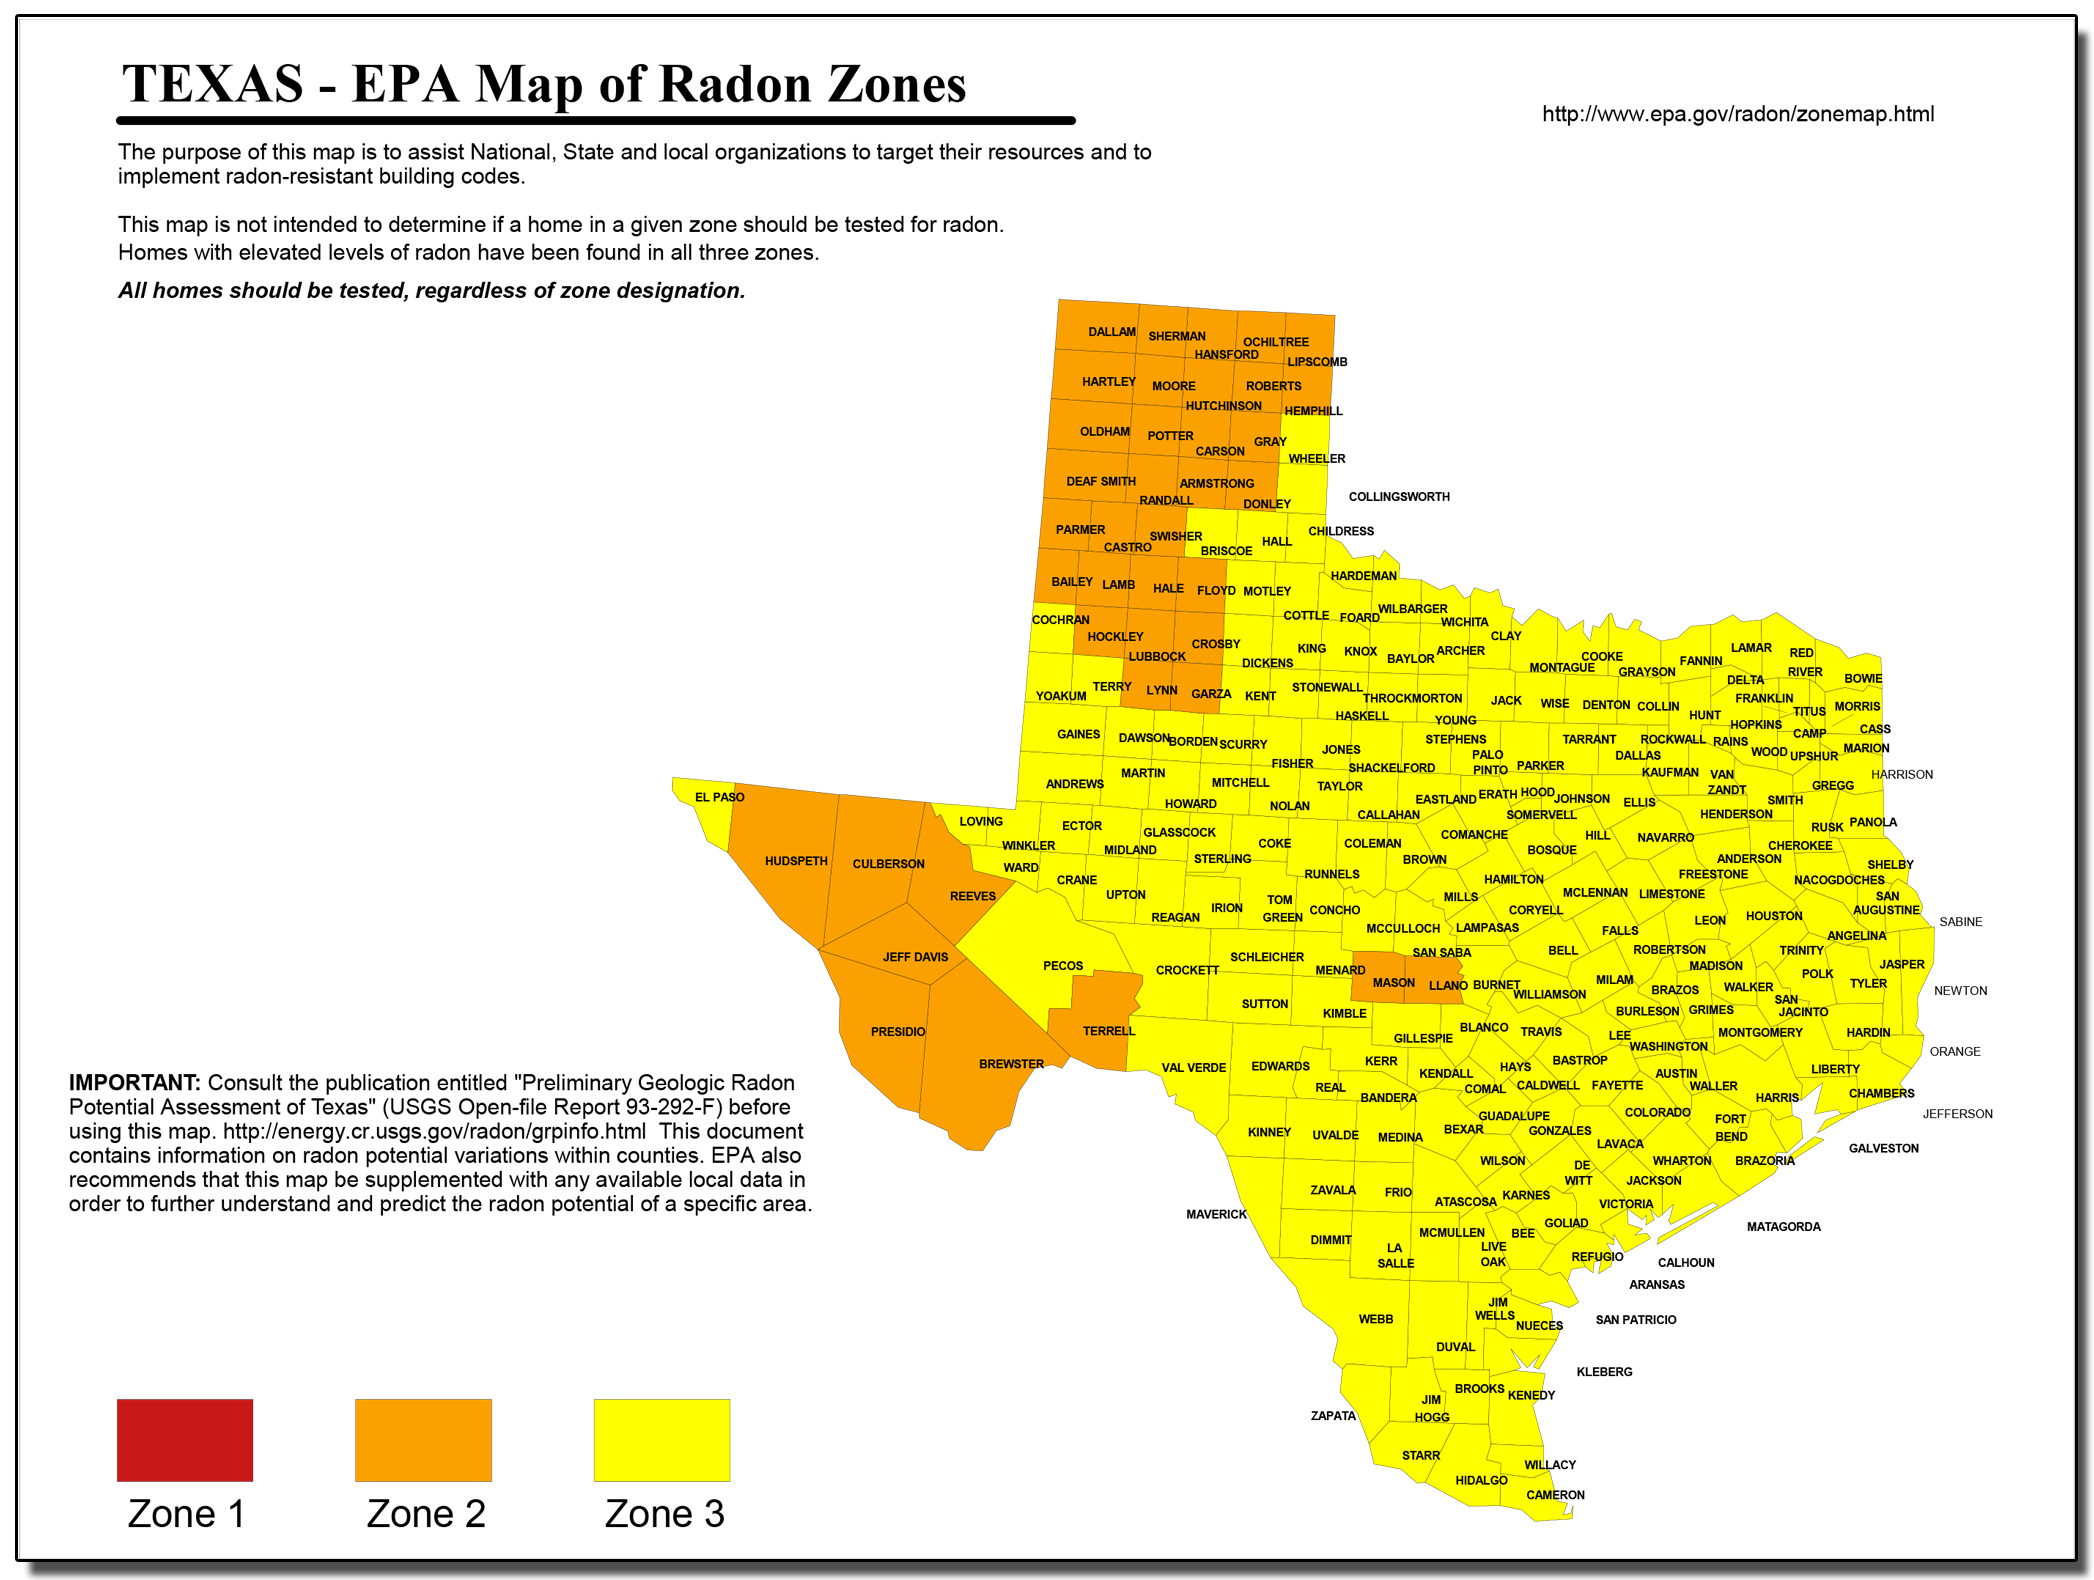 1993 EPA map of radon risk level from gas in Texas